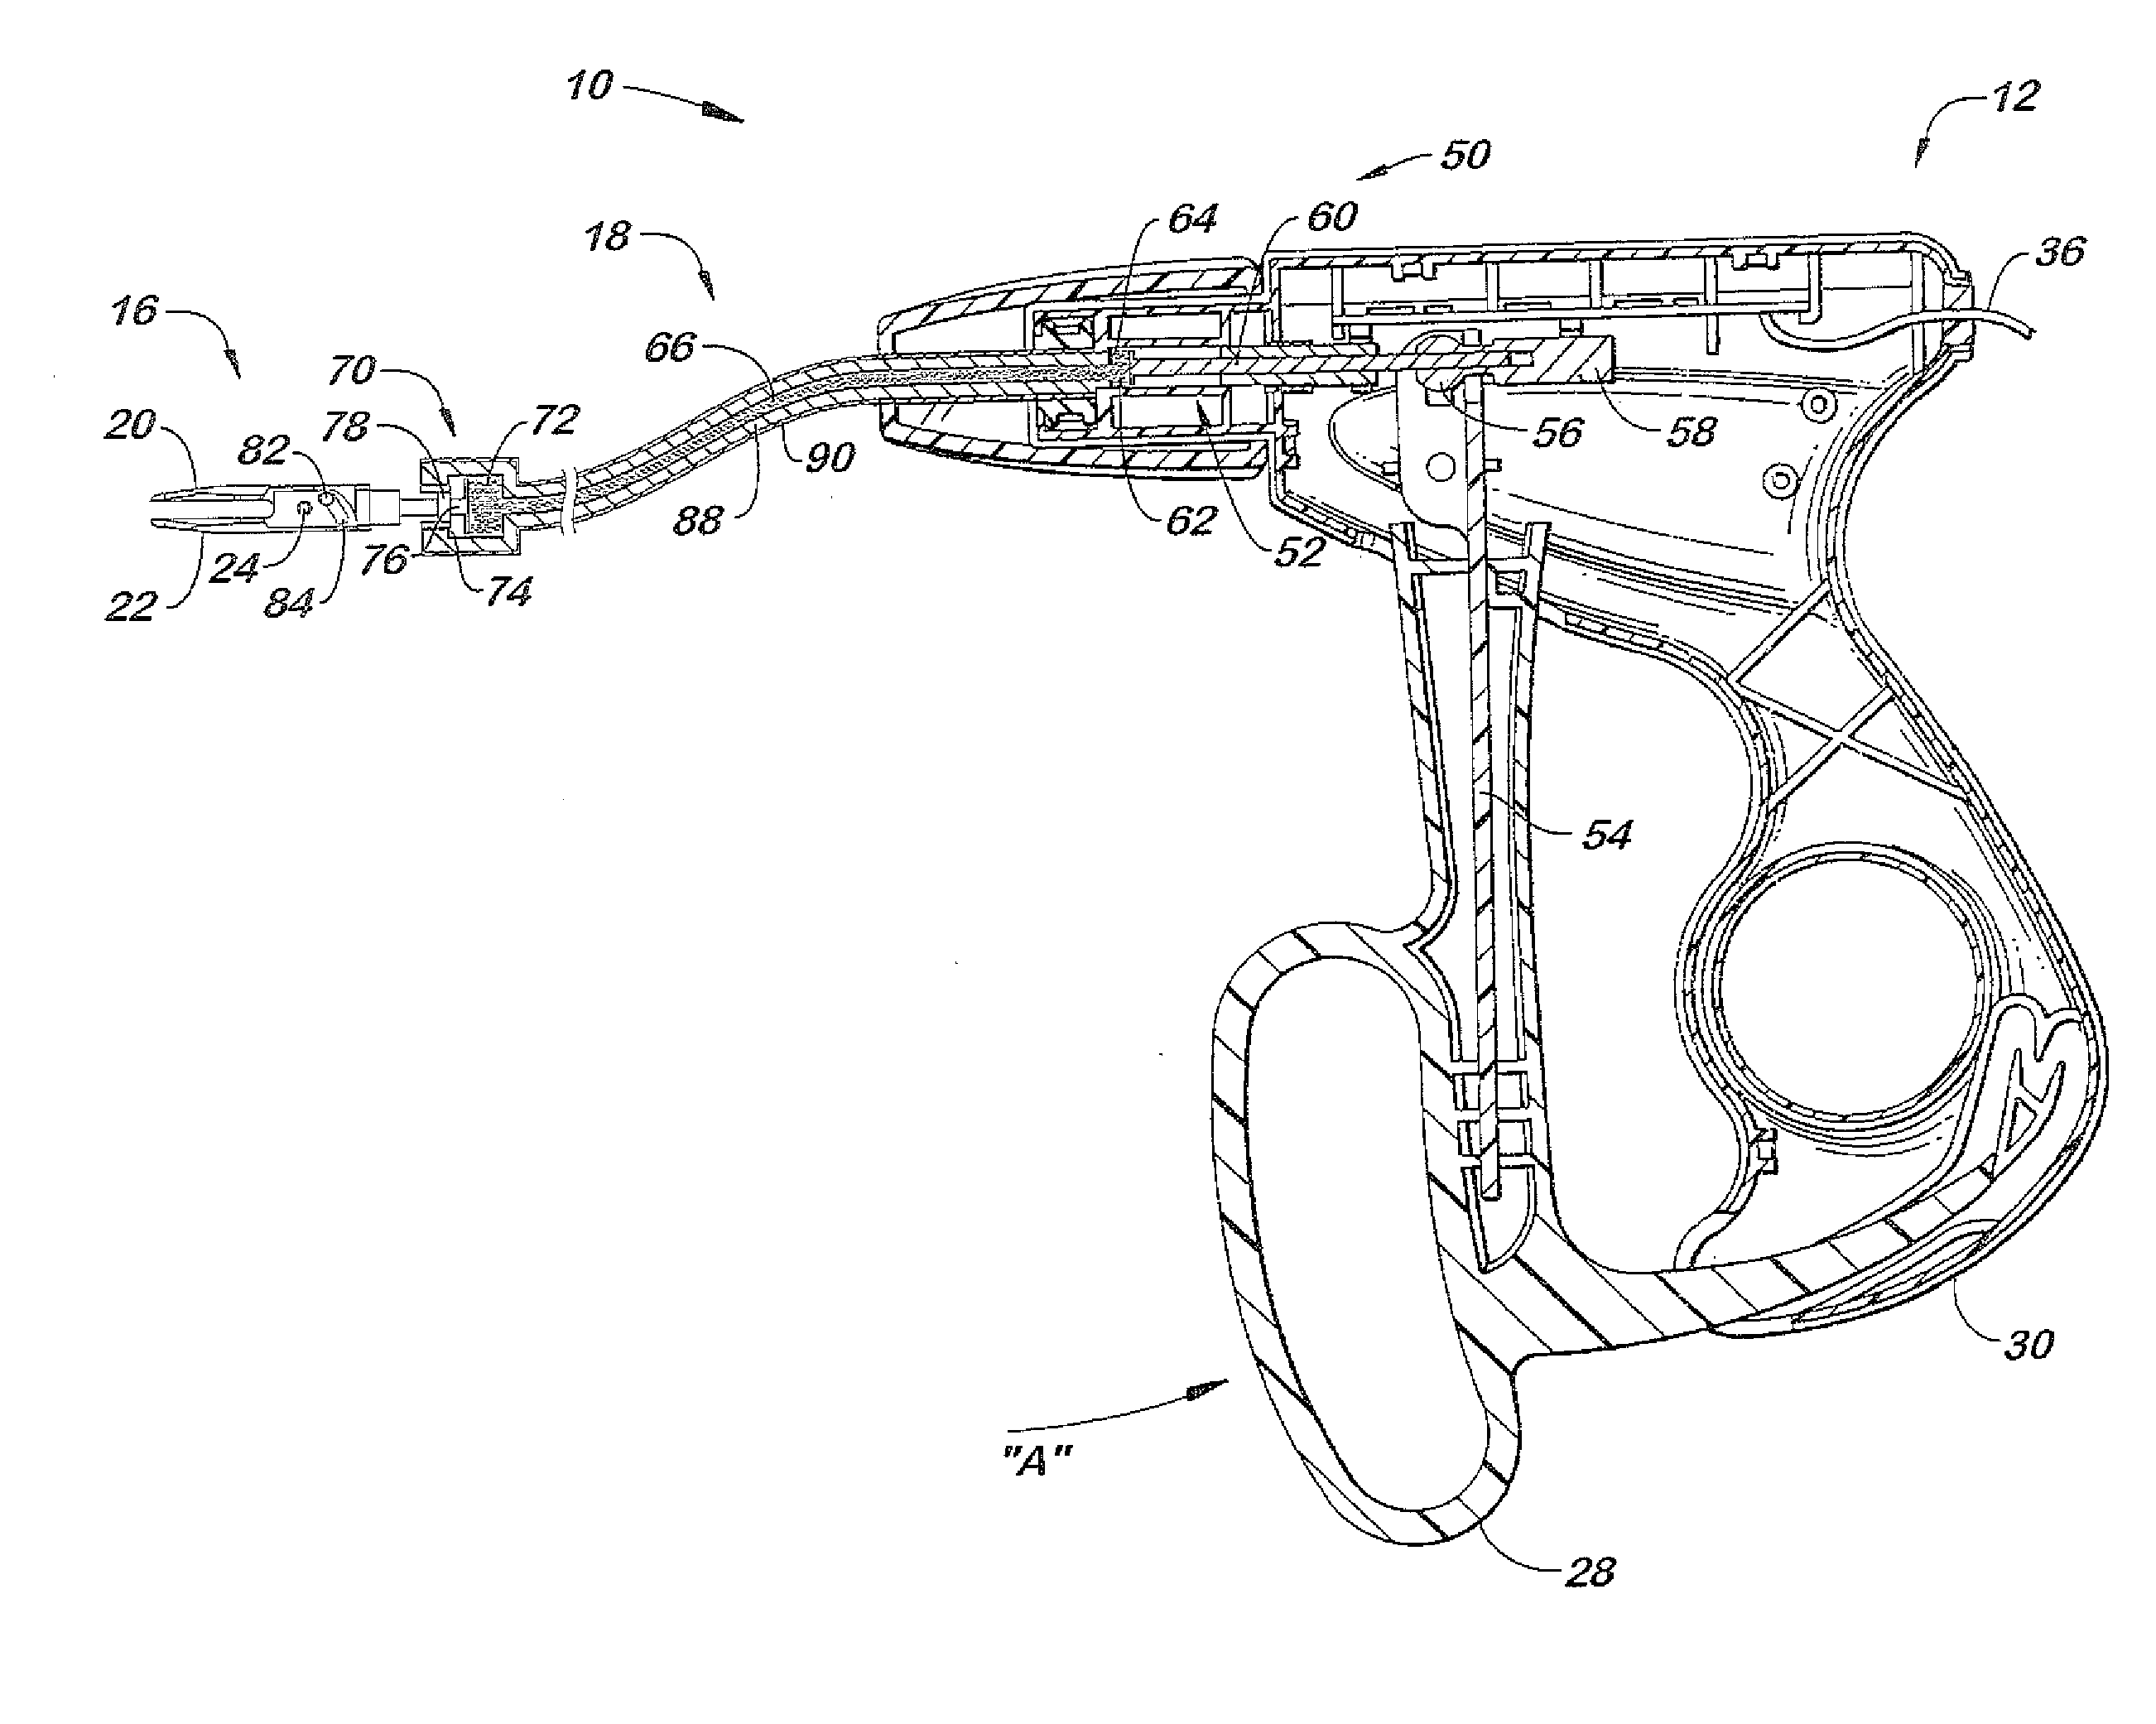 Method of Transferring Force Using Flexible Fluid-Filled Tubing in an Articulating Surgical Instrument